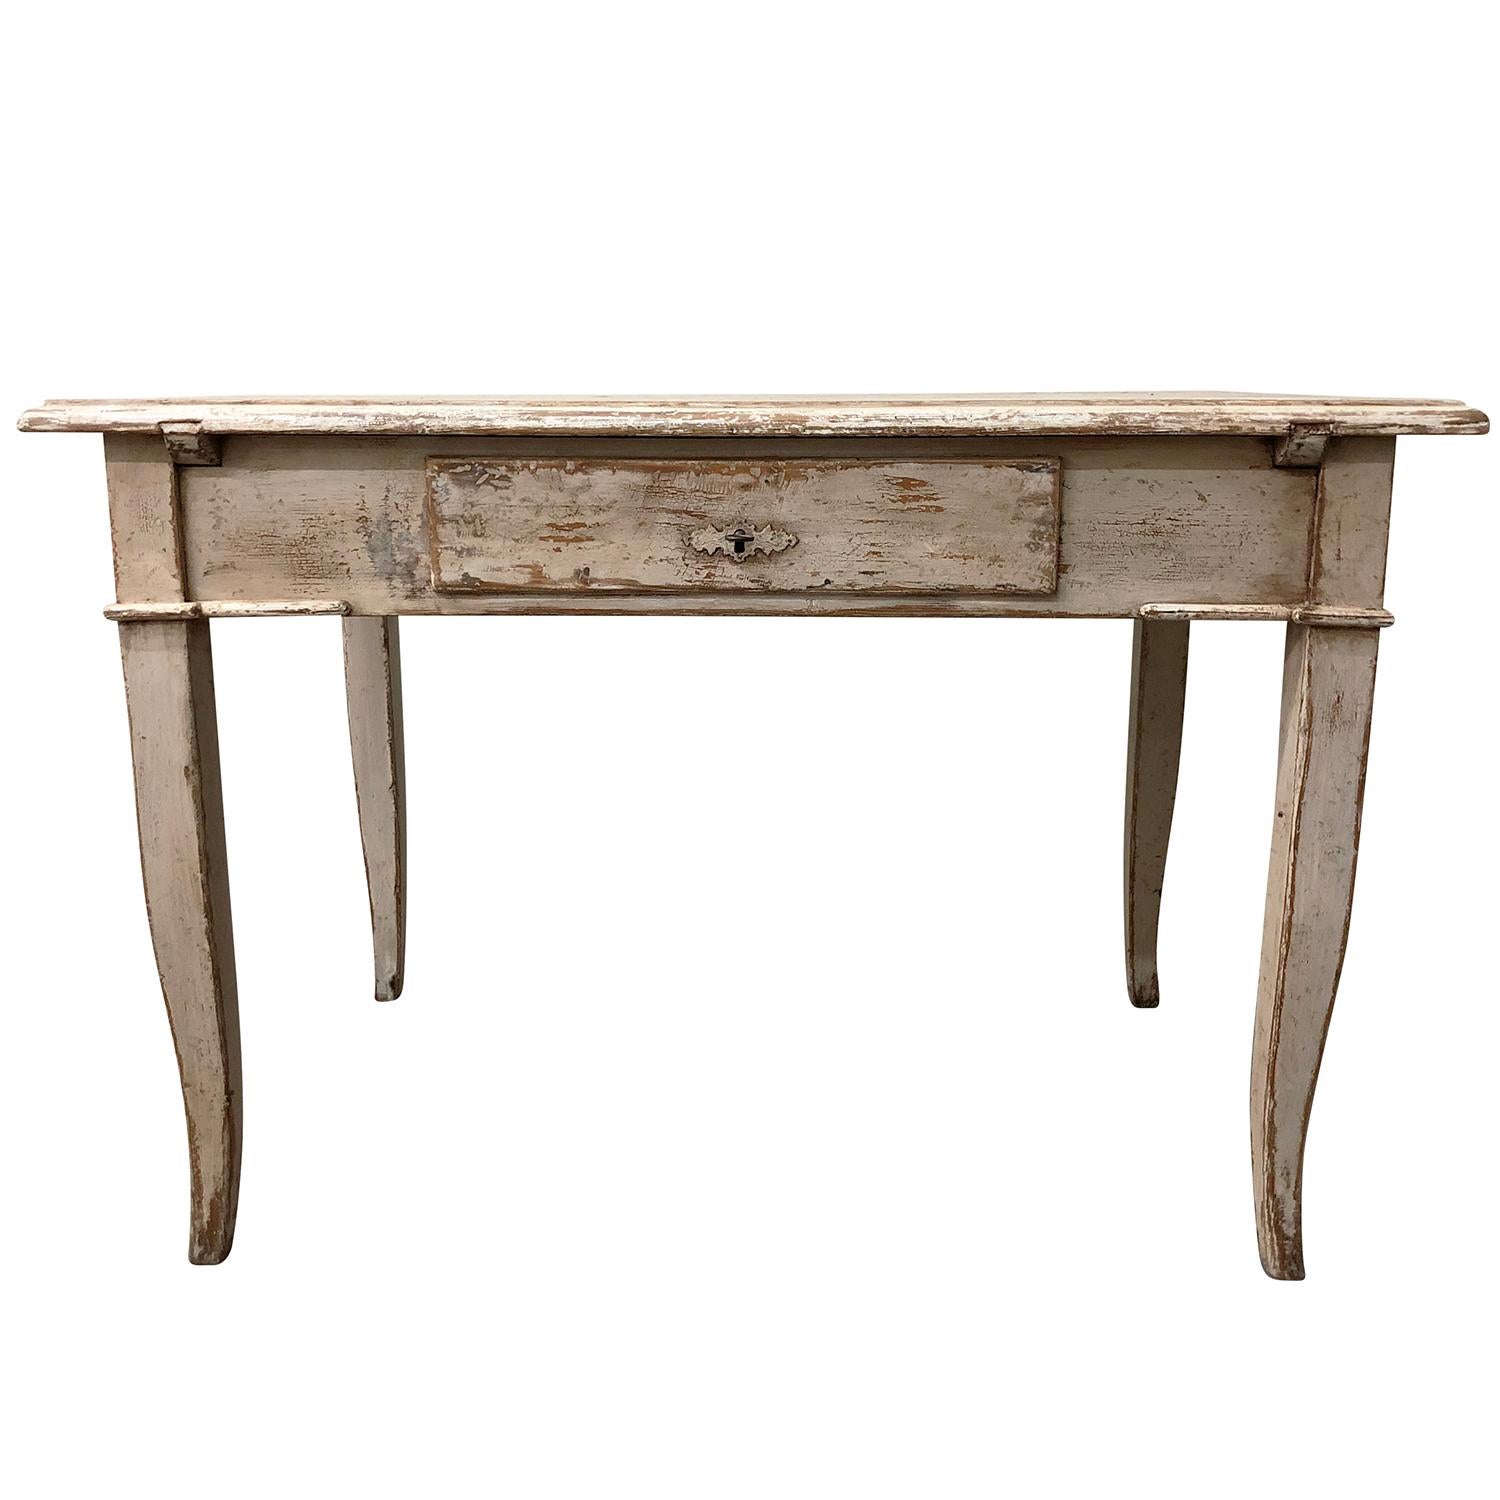 An antique French farmer’s table made of hand carved walnut, original hardware with one-drawer with a white washed finish, supported by four slightly wooden curved legs. The end table represents the French Provincial period. Wear consistent with age